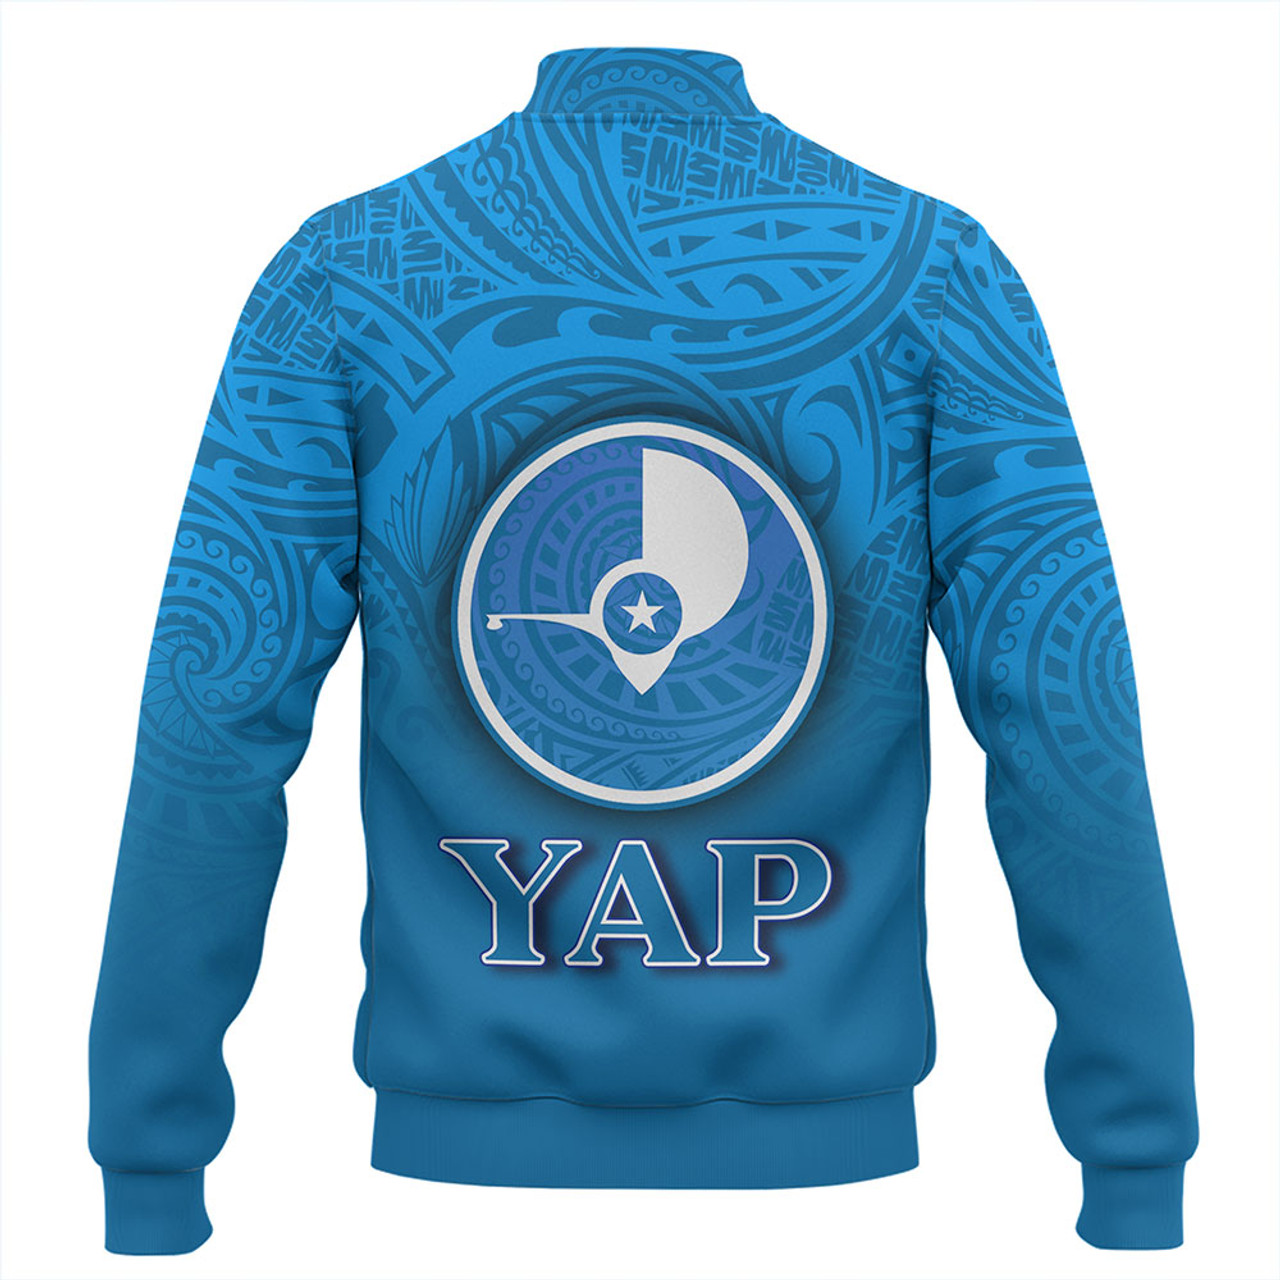 Yap State Baseball Jacket Flag Color With Traditional Patterns